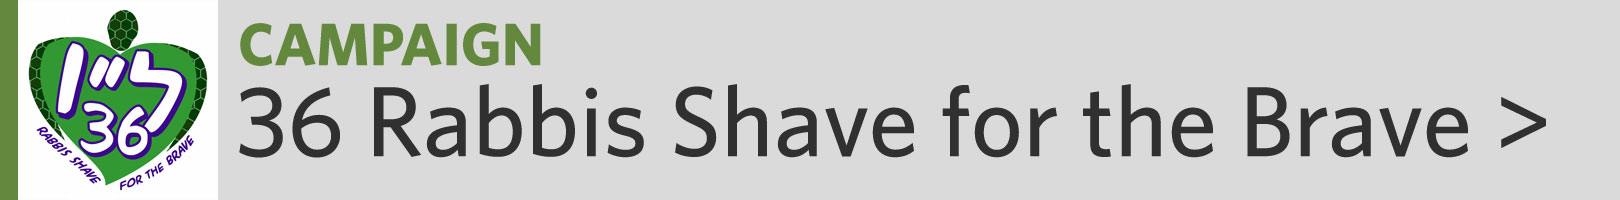 Campaign: 36 Rabbis Shave for the Brave